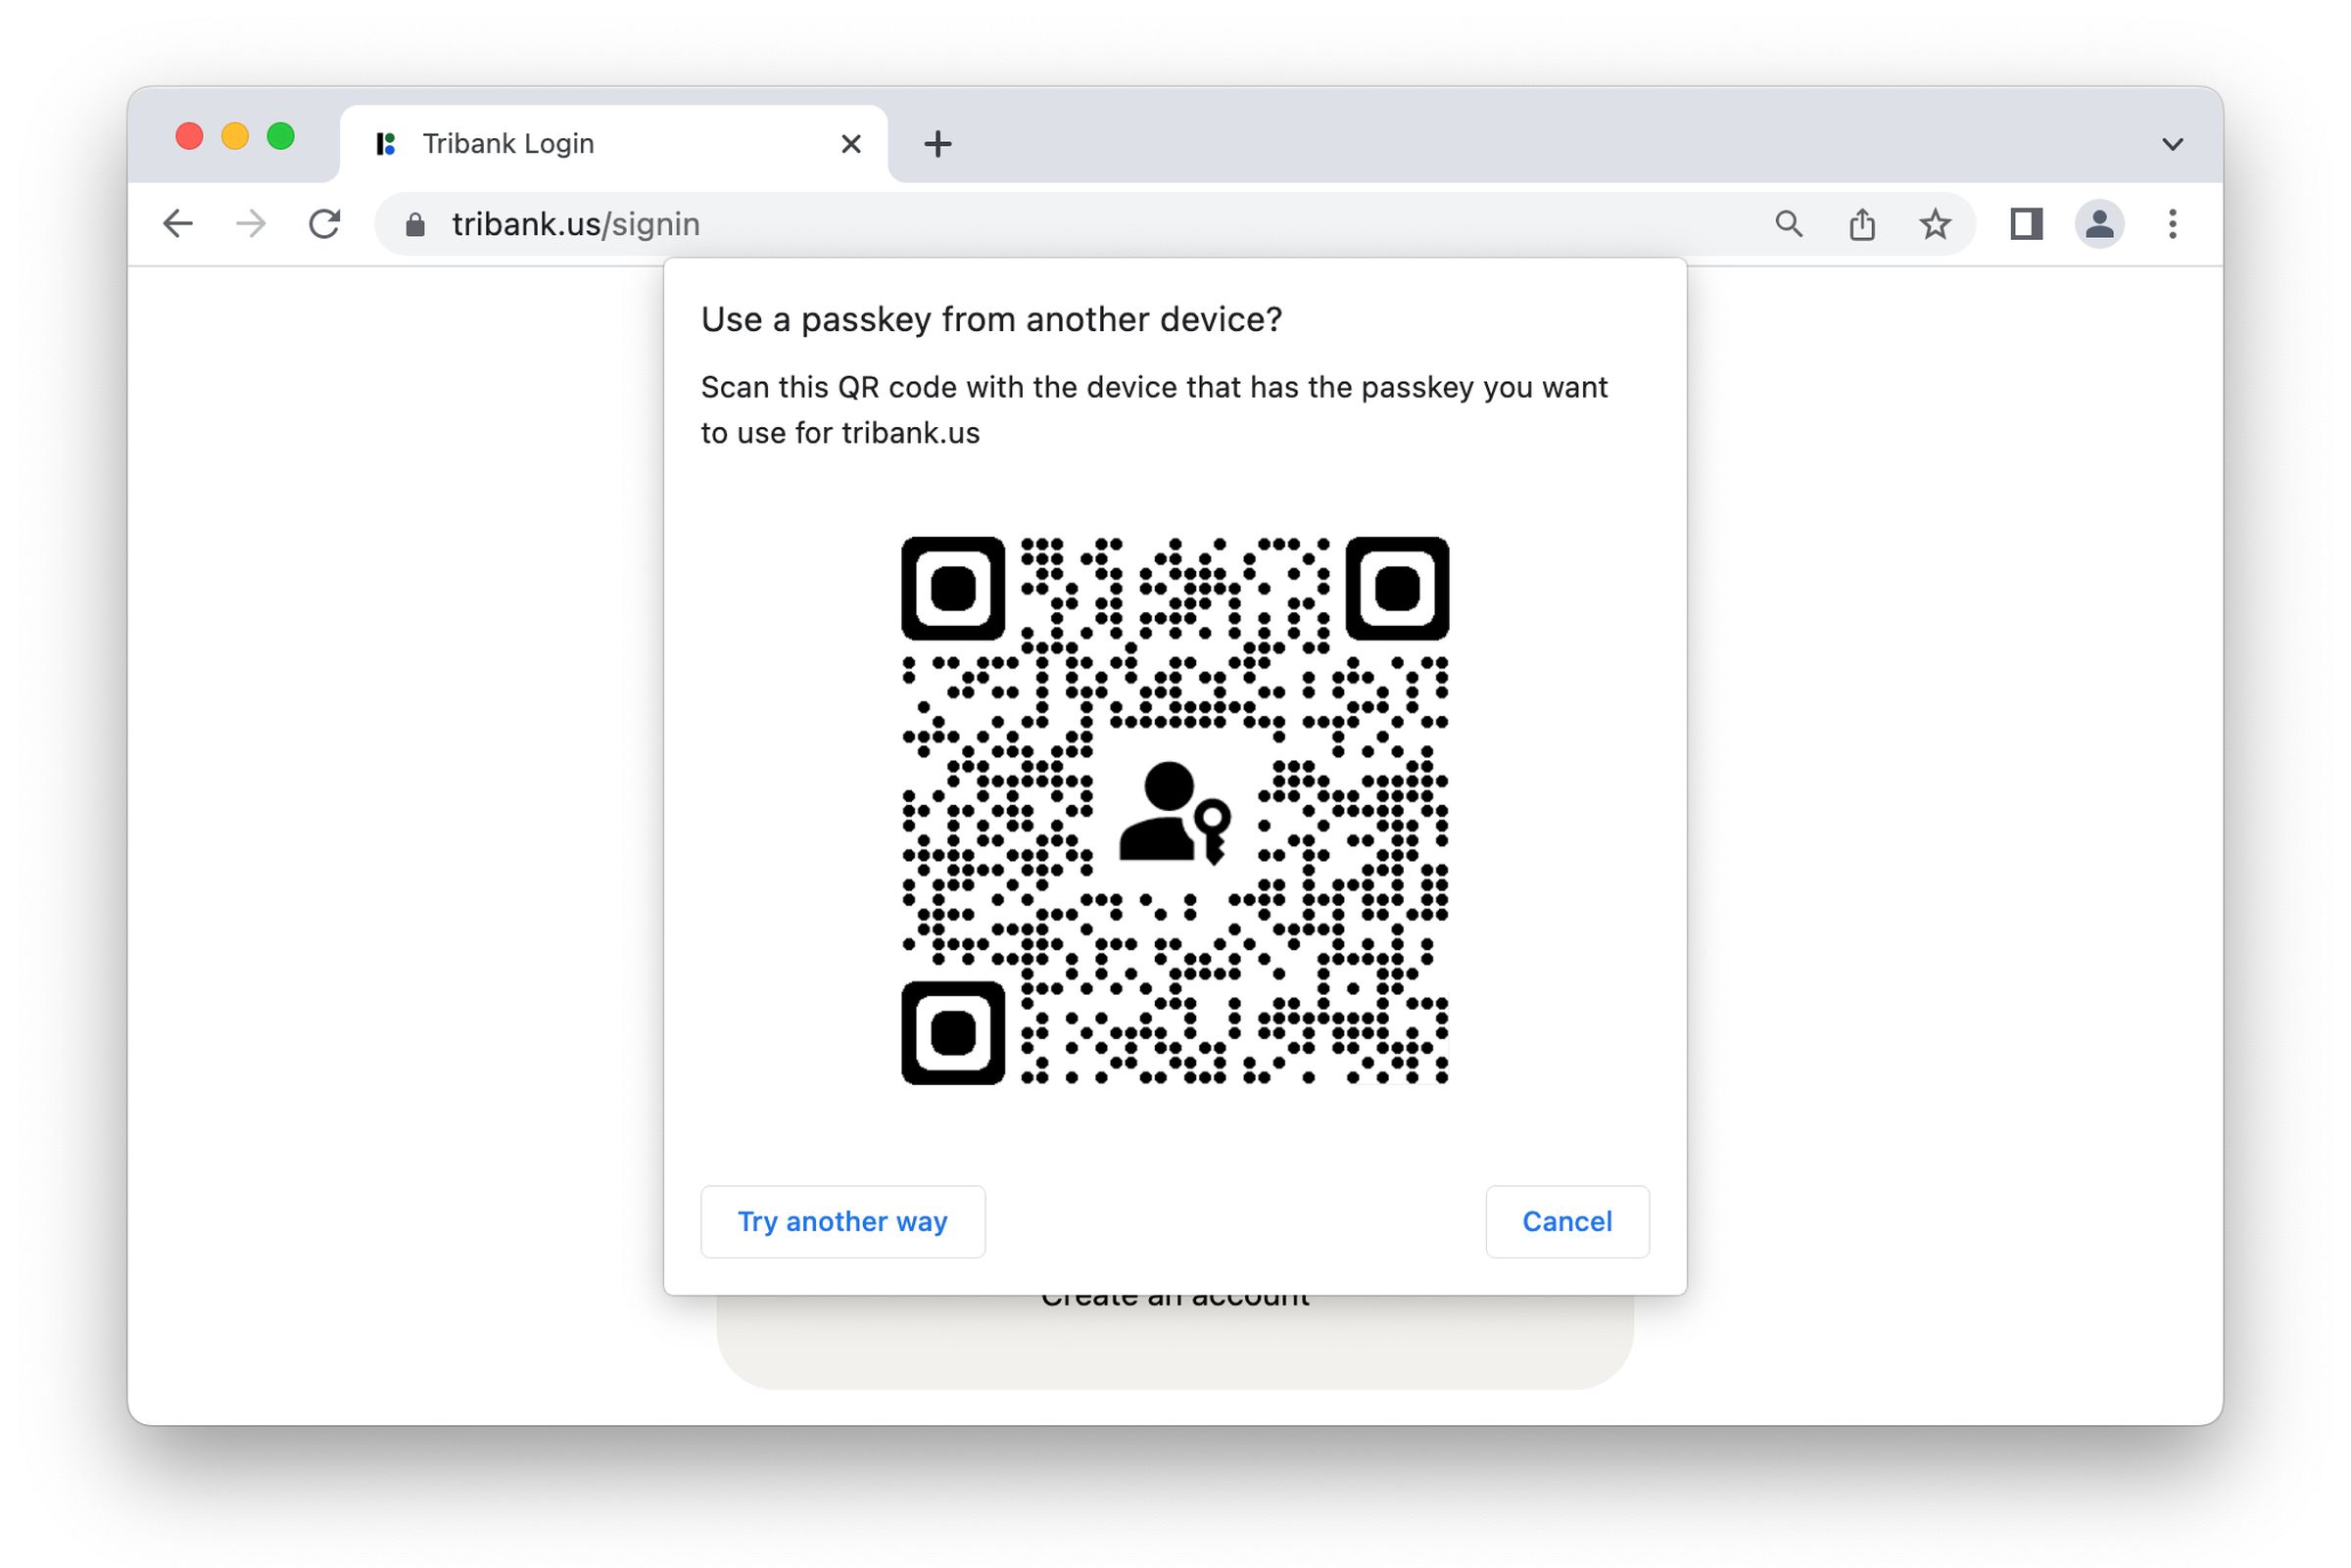 This QR code is generated when trying to log in to this site. It can link with your mobile device and use the passkey on it.